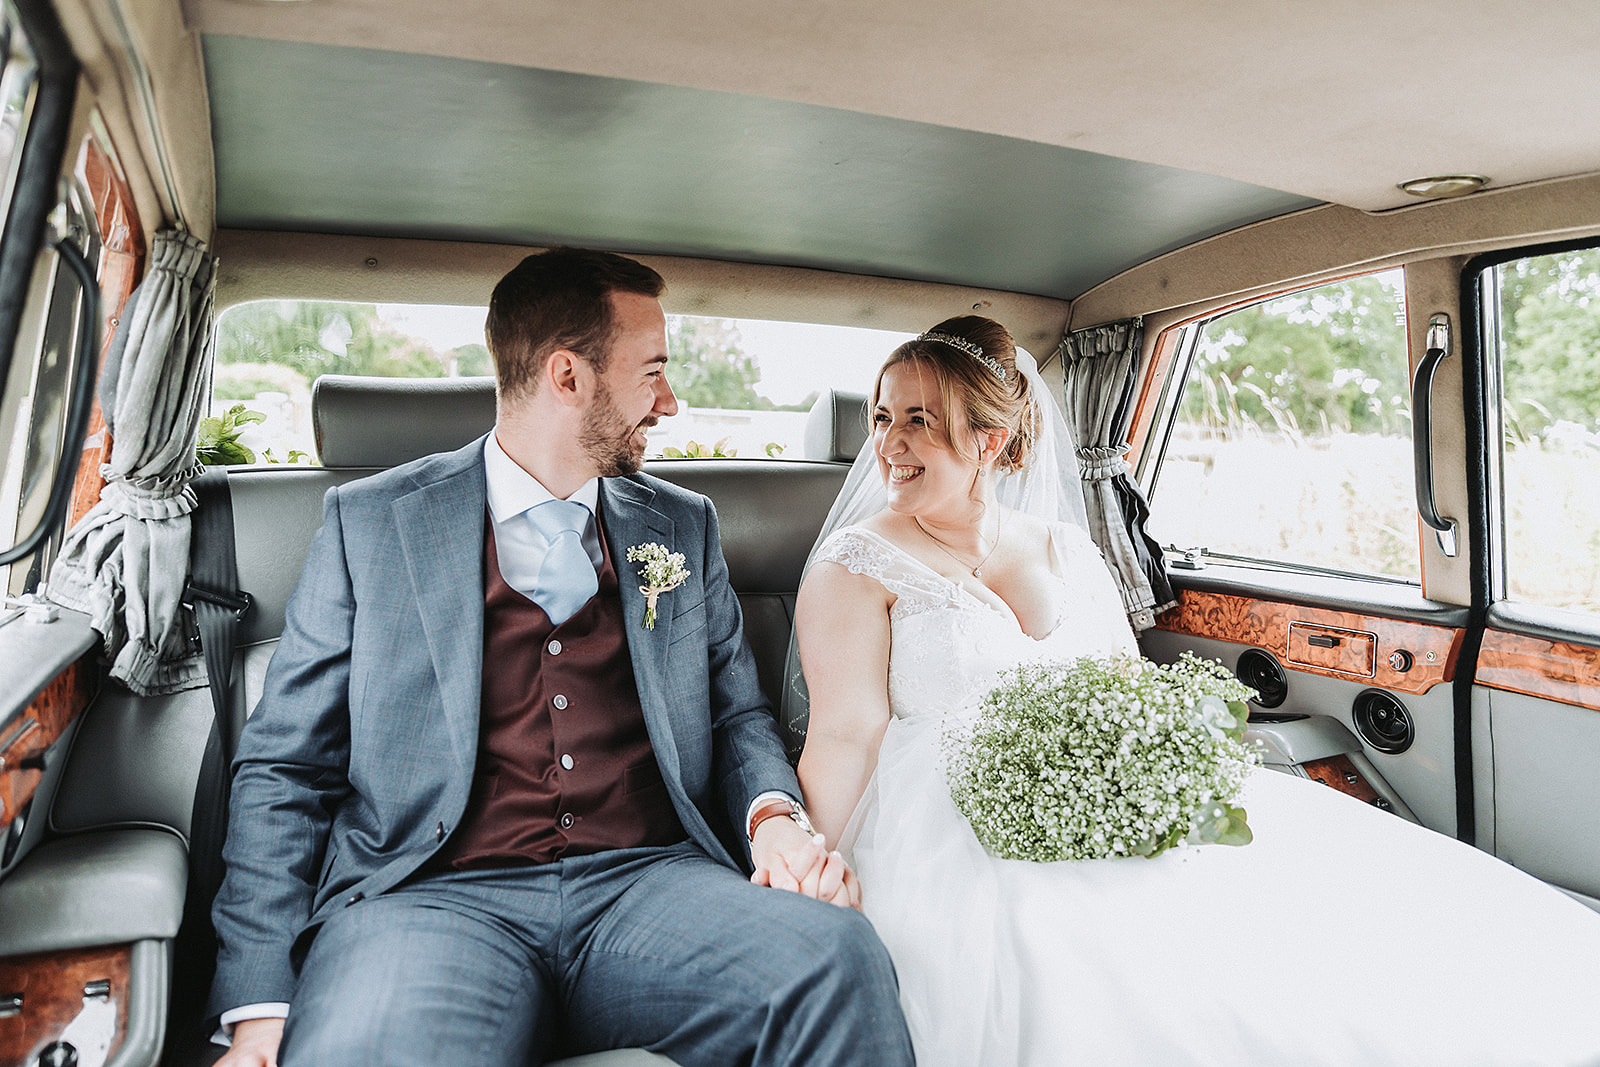 Bride and groom sitting and smiling inside the car from Lord Cars London. Wedding photo by Perfect Memories Photography